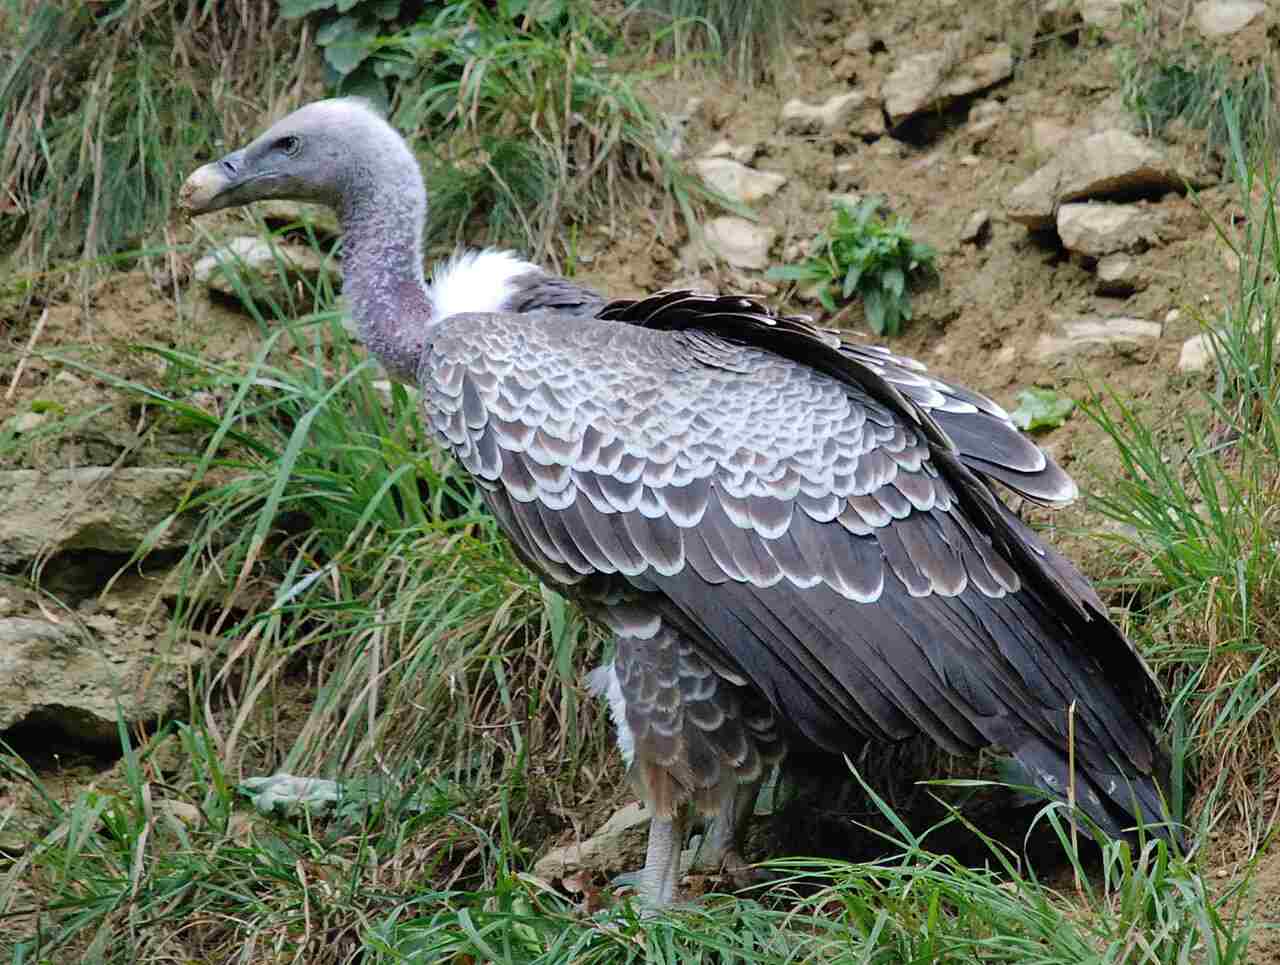 What Type of Consumer is a Vulture: Due to inability to Manufacture Their Own Food (Like Plants), Vultures Cannot be Classified as Producers (Credit: Matthias Zepper 2007 .CC BY-SA 3.0.)